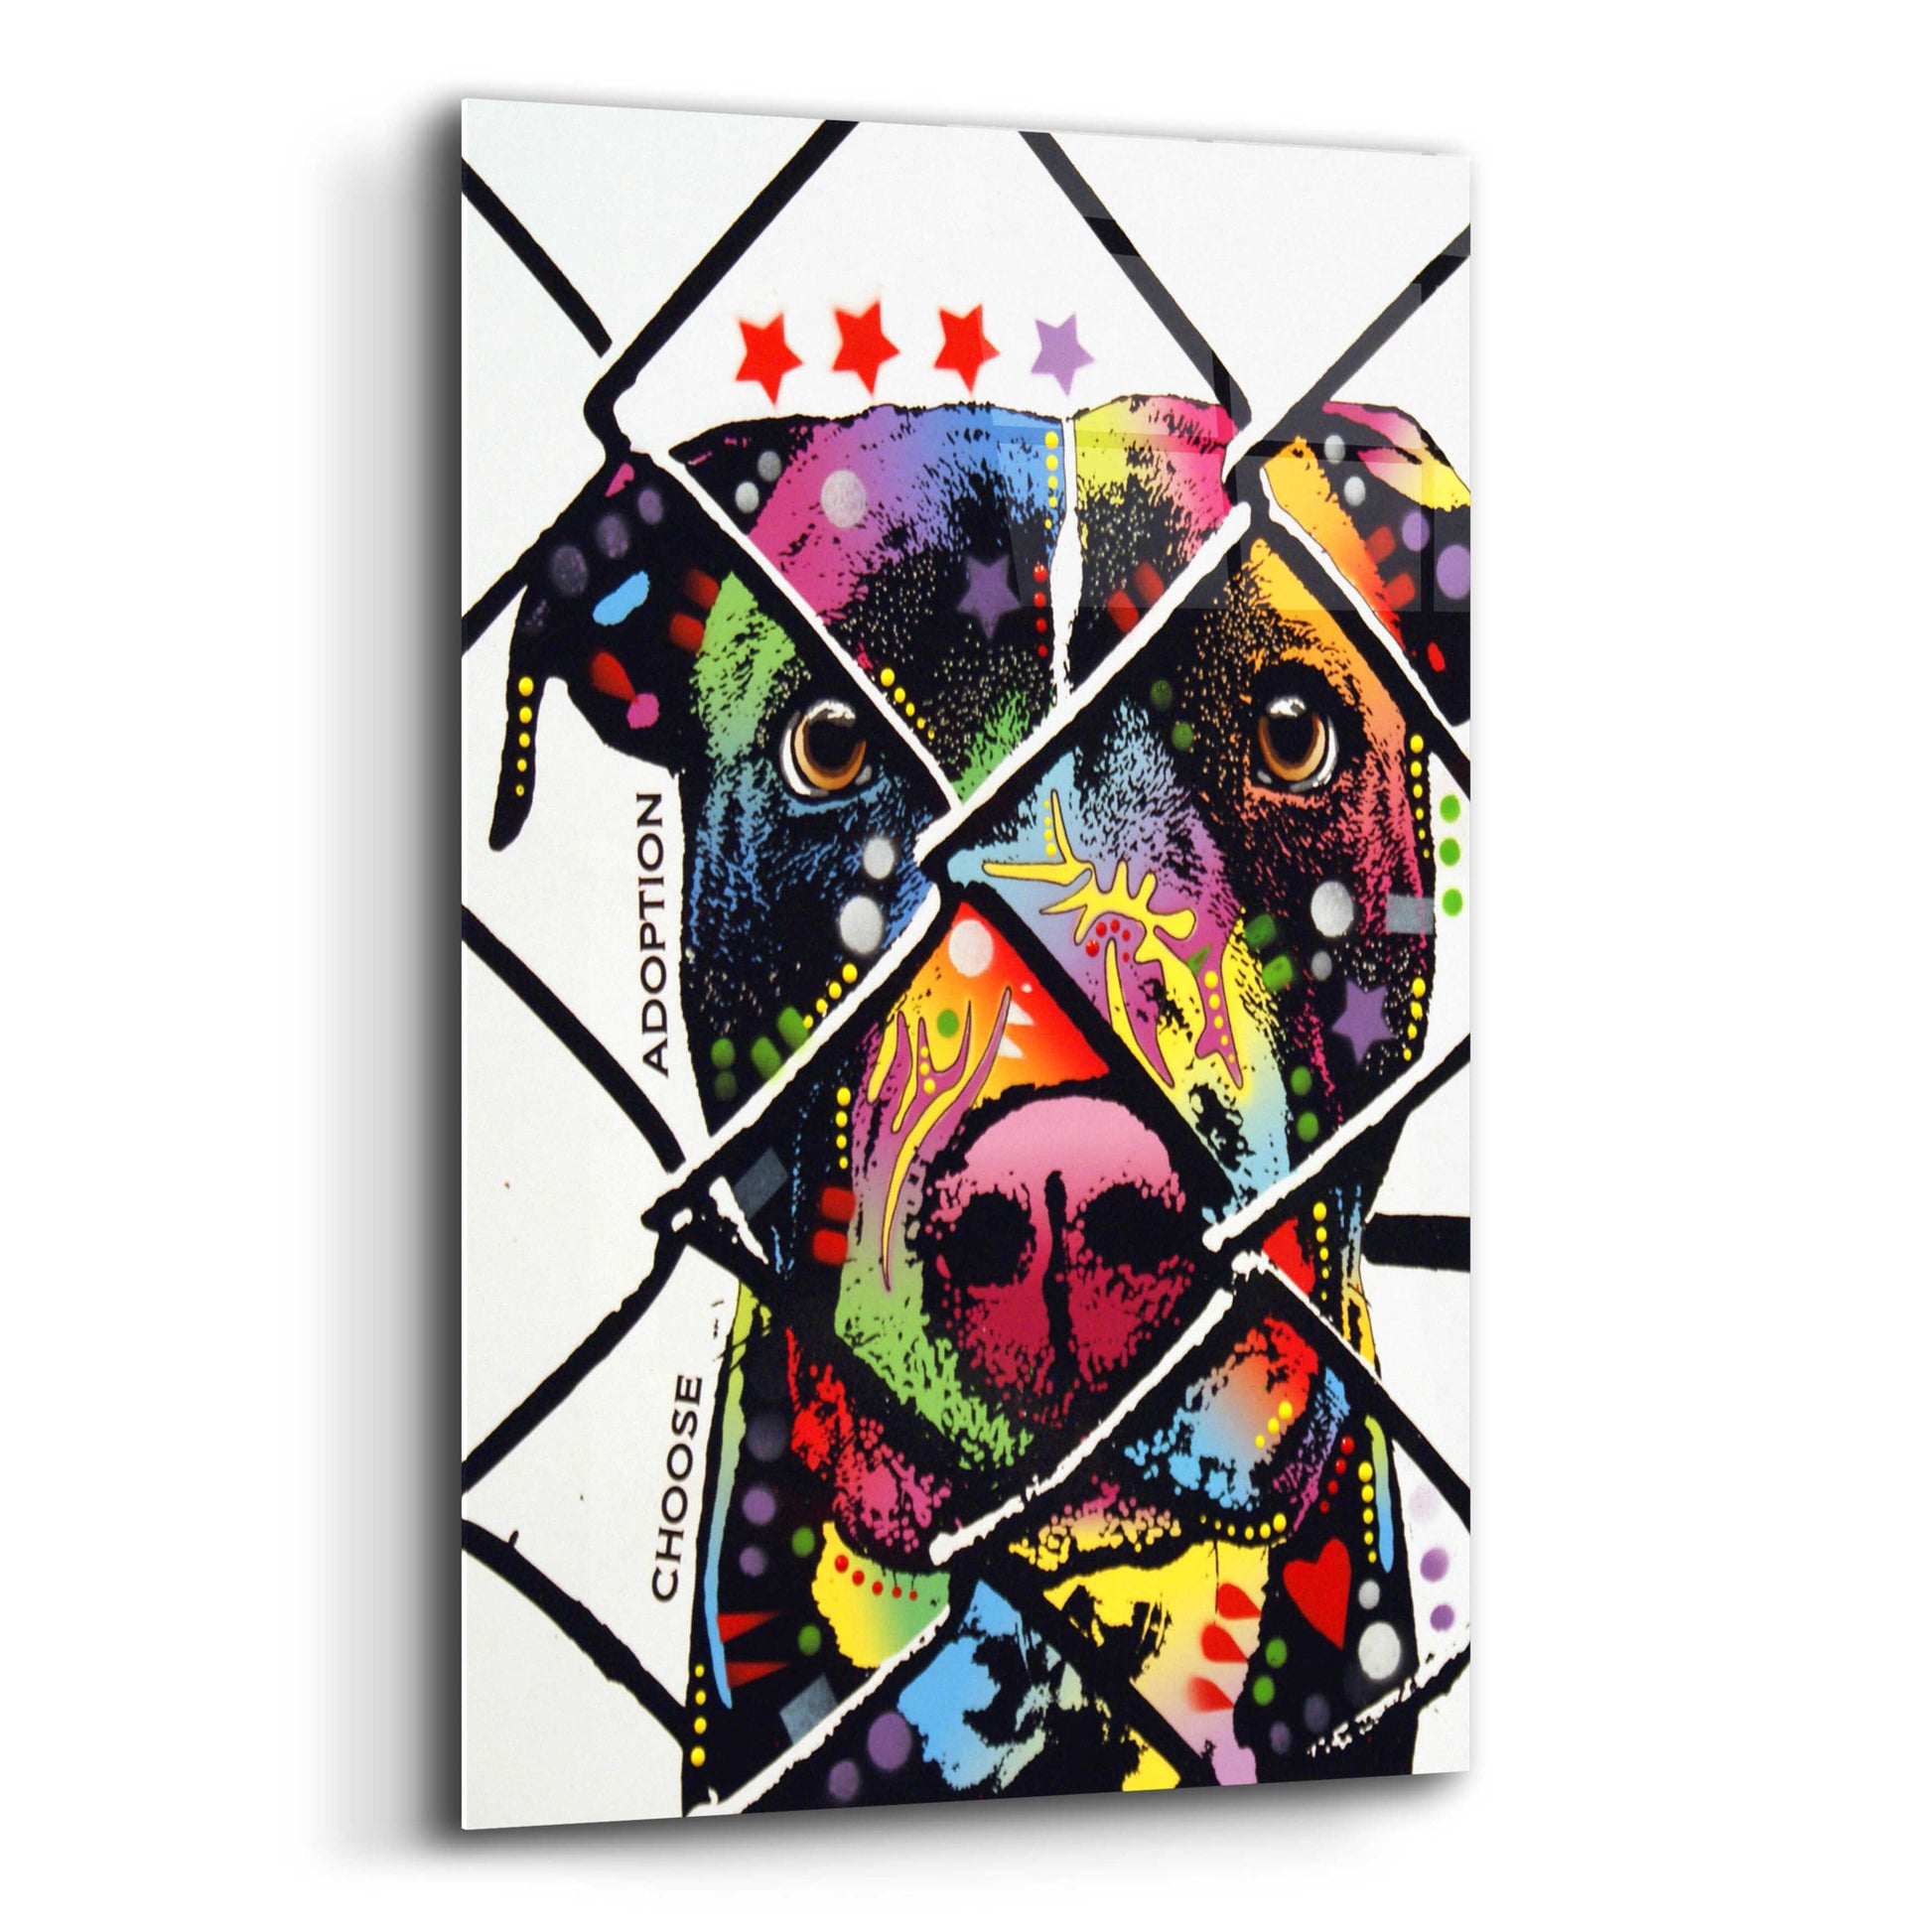 Epic Art 'Choose Adoption' by Dean Russo, Acrylic Glass Wall Art,12x16